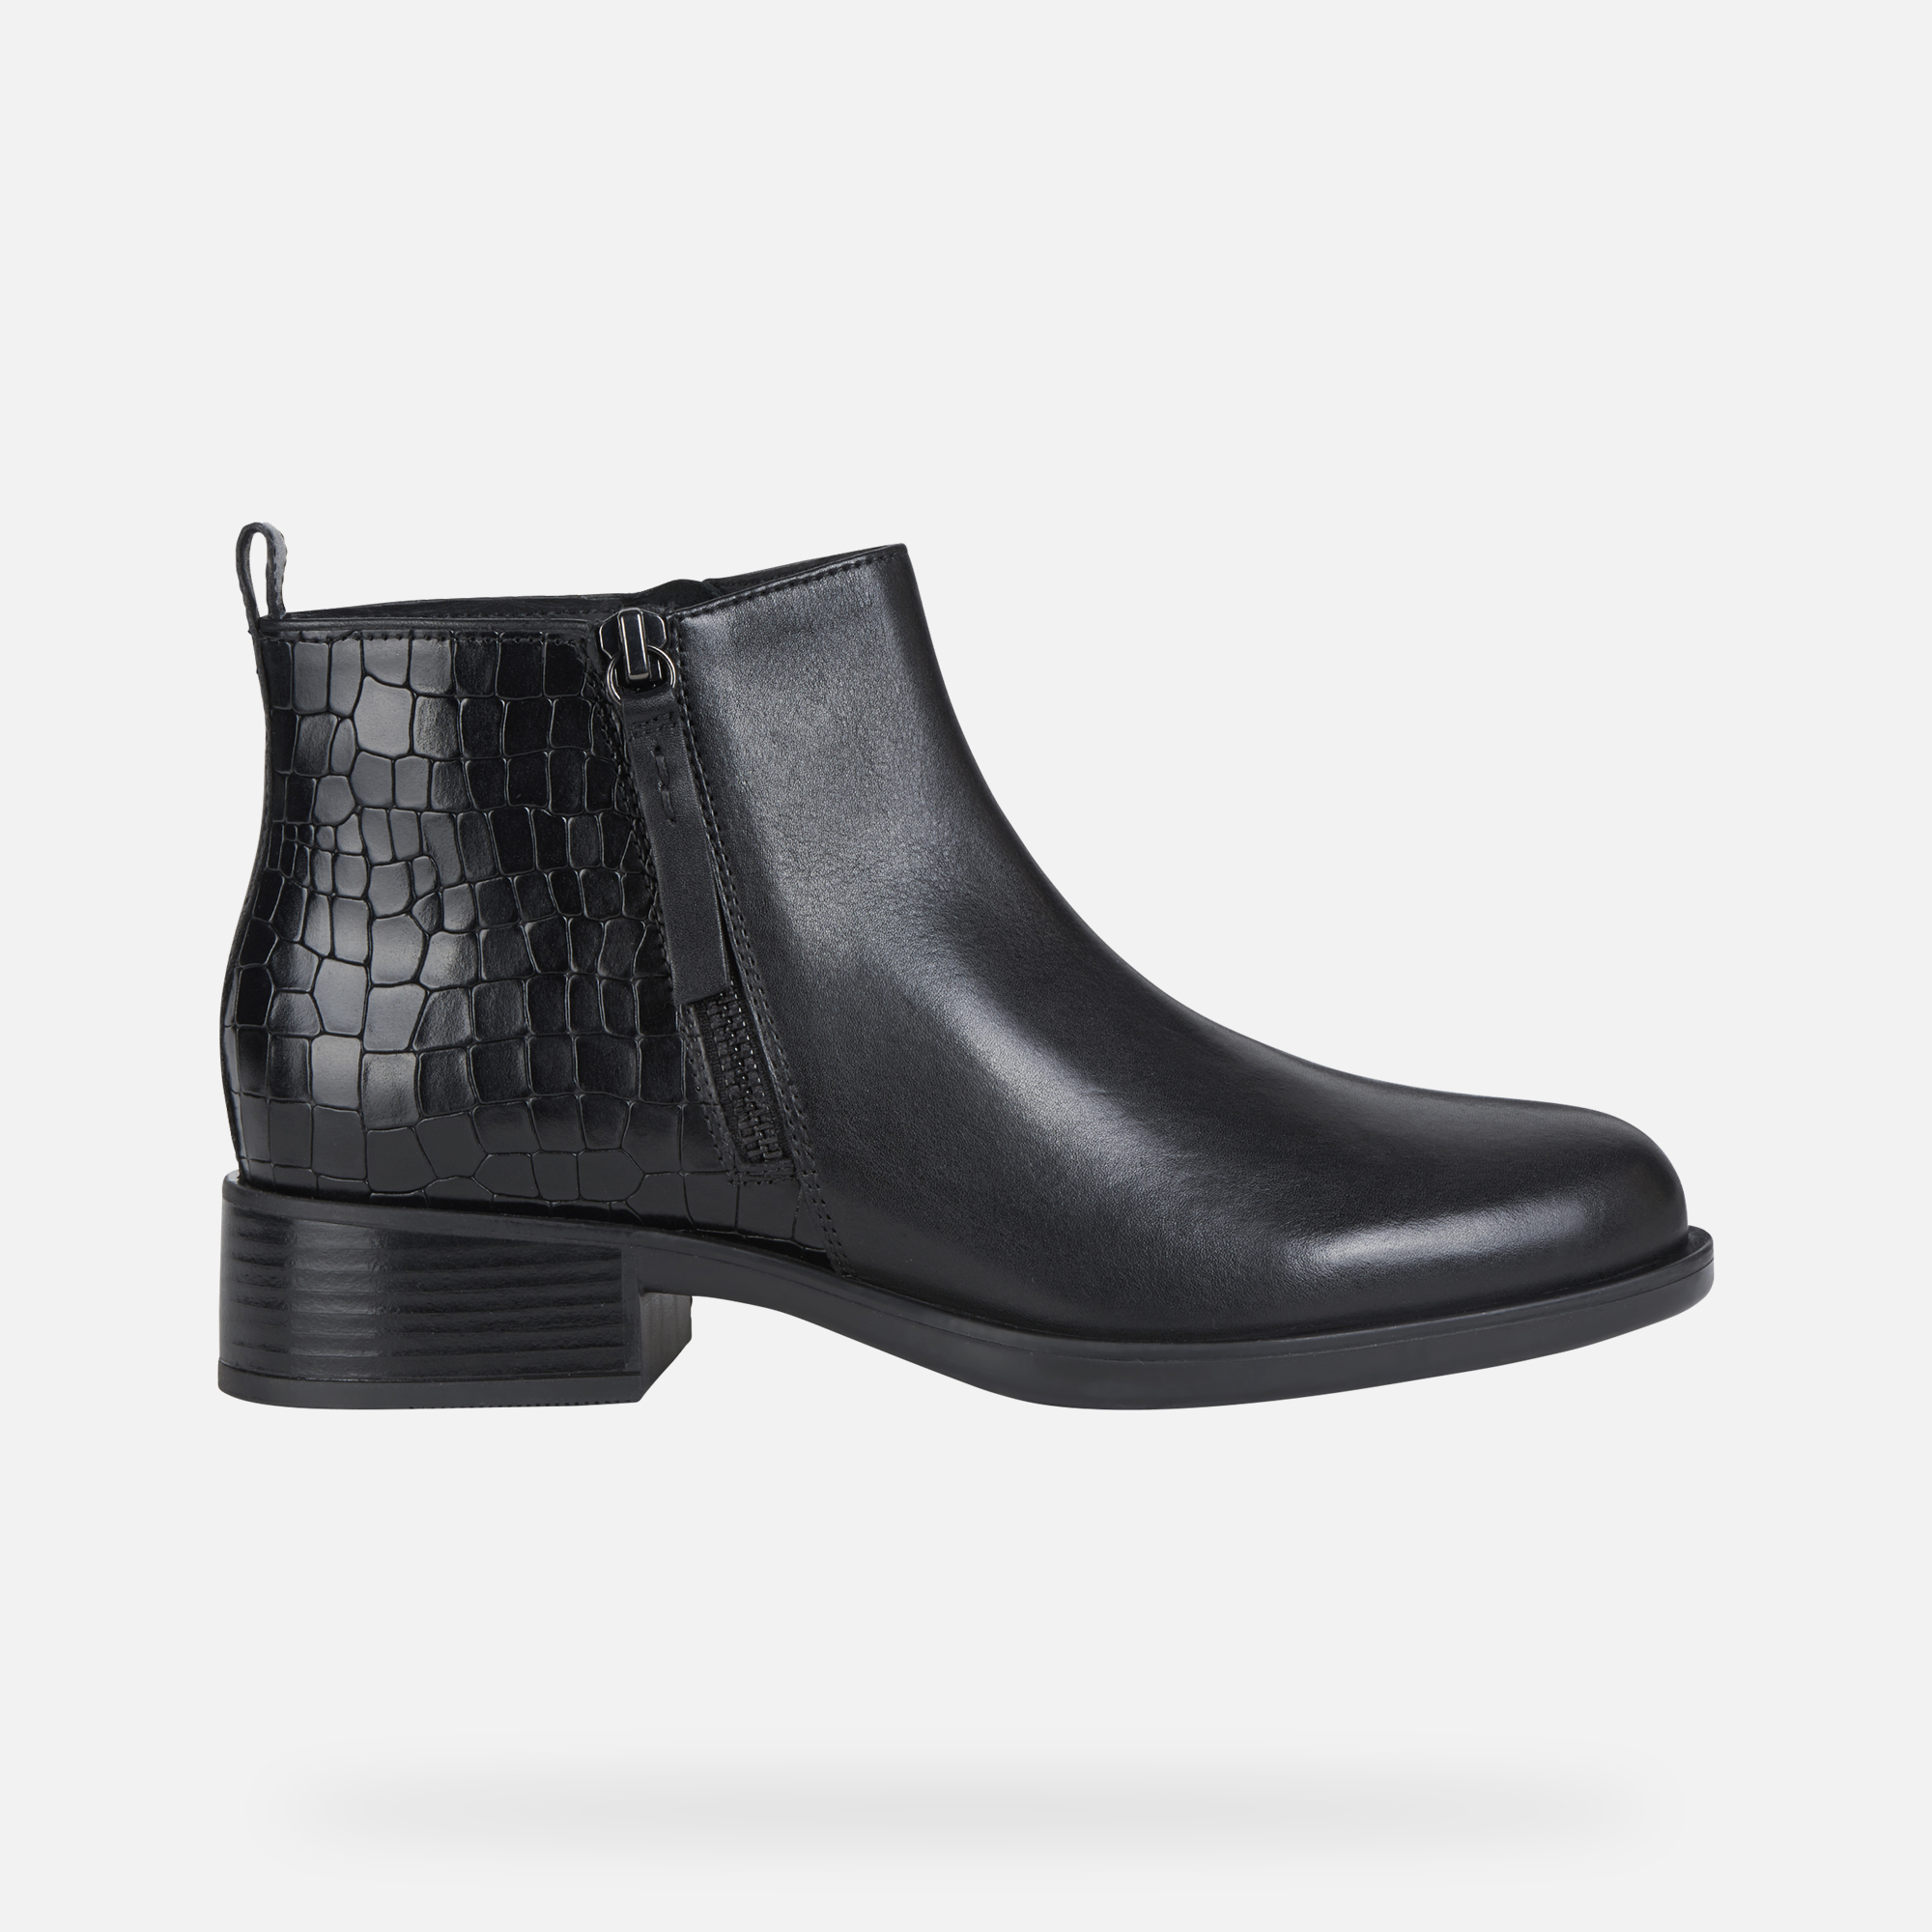 Geox® RESIA Woman: Black Ankle Boots | FW21/22 Geox®